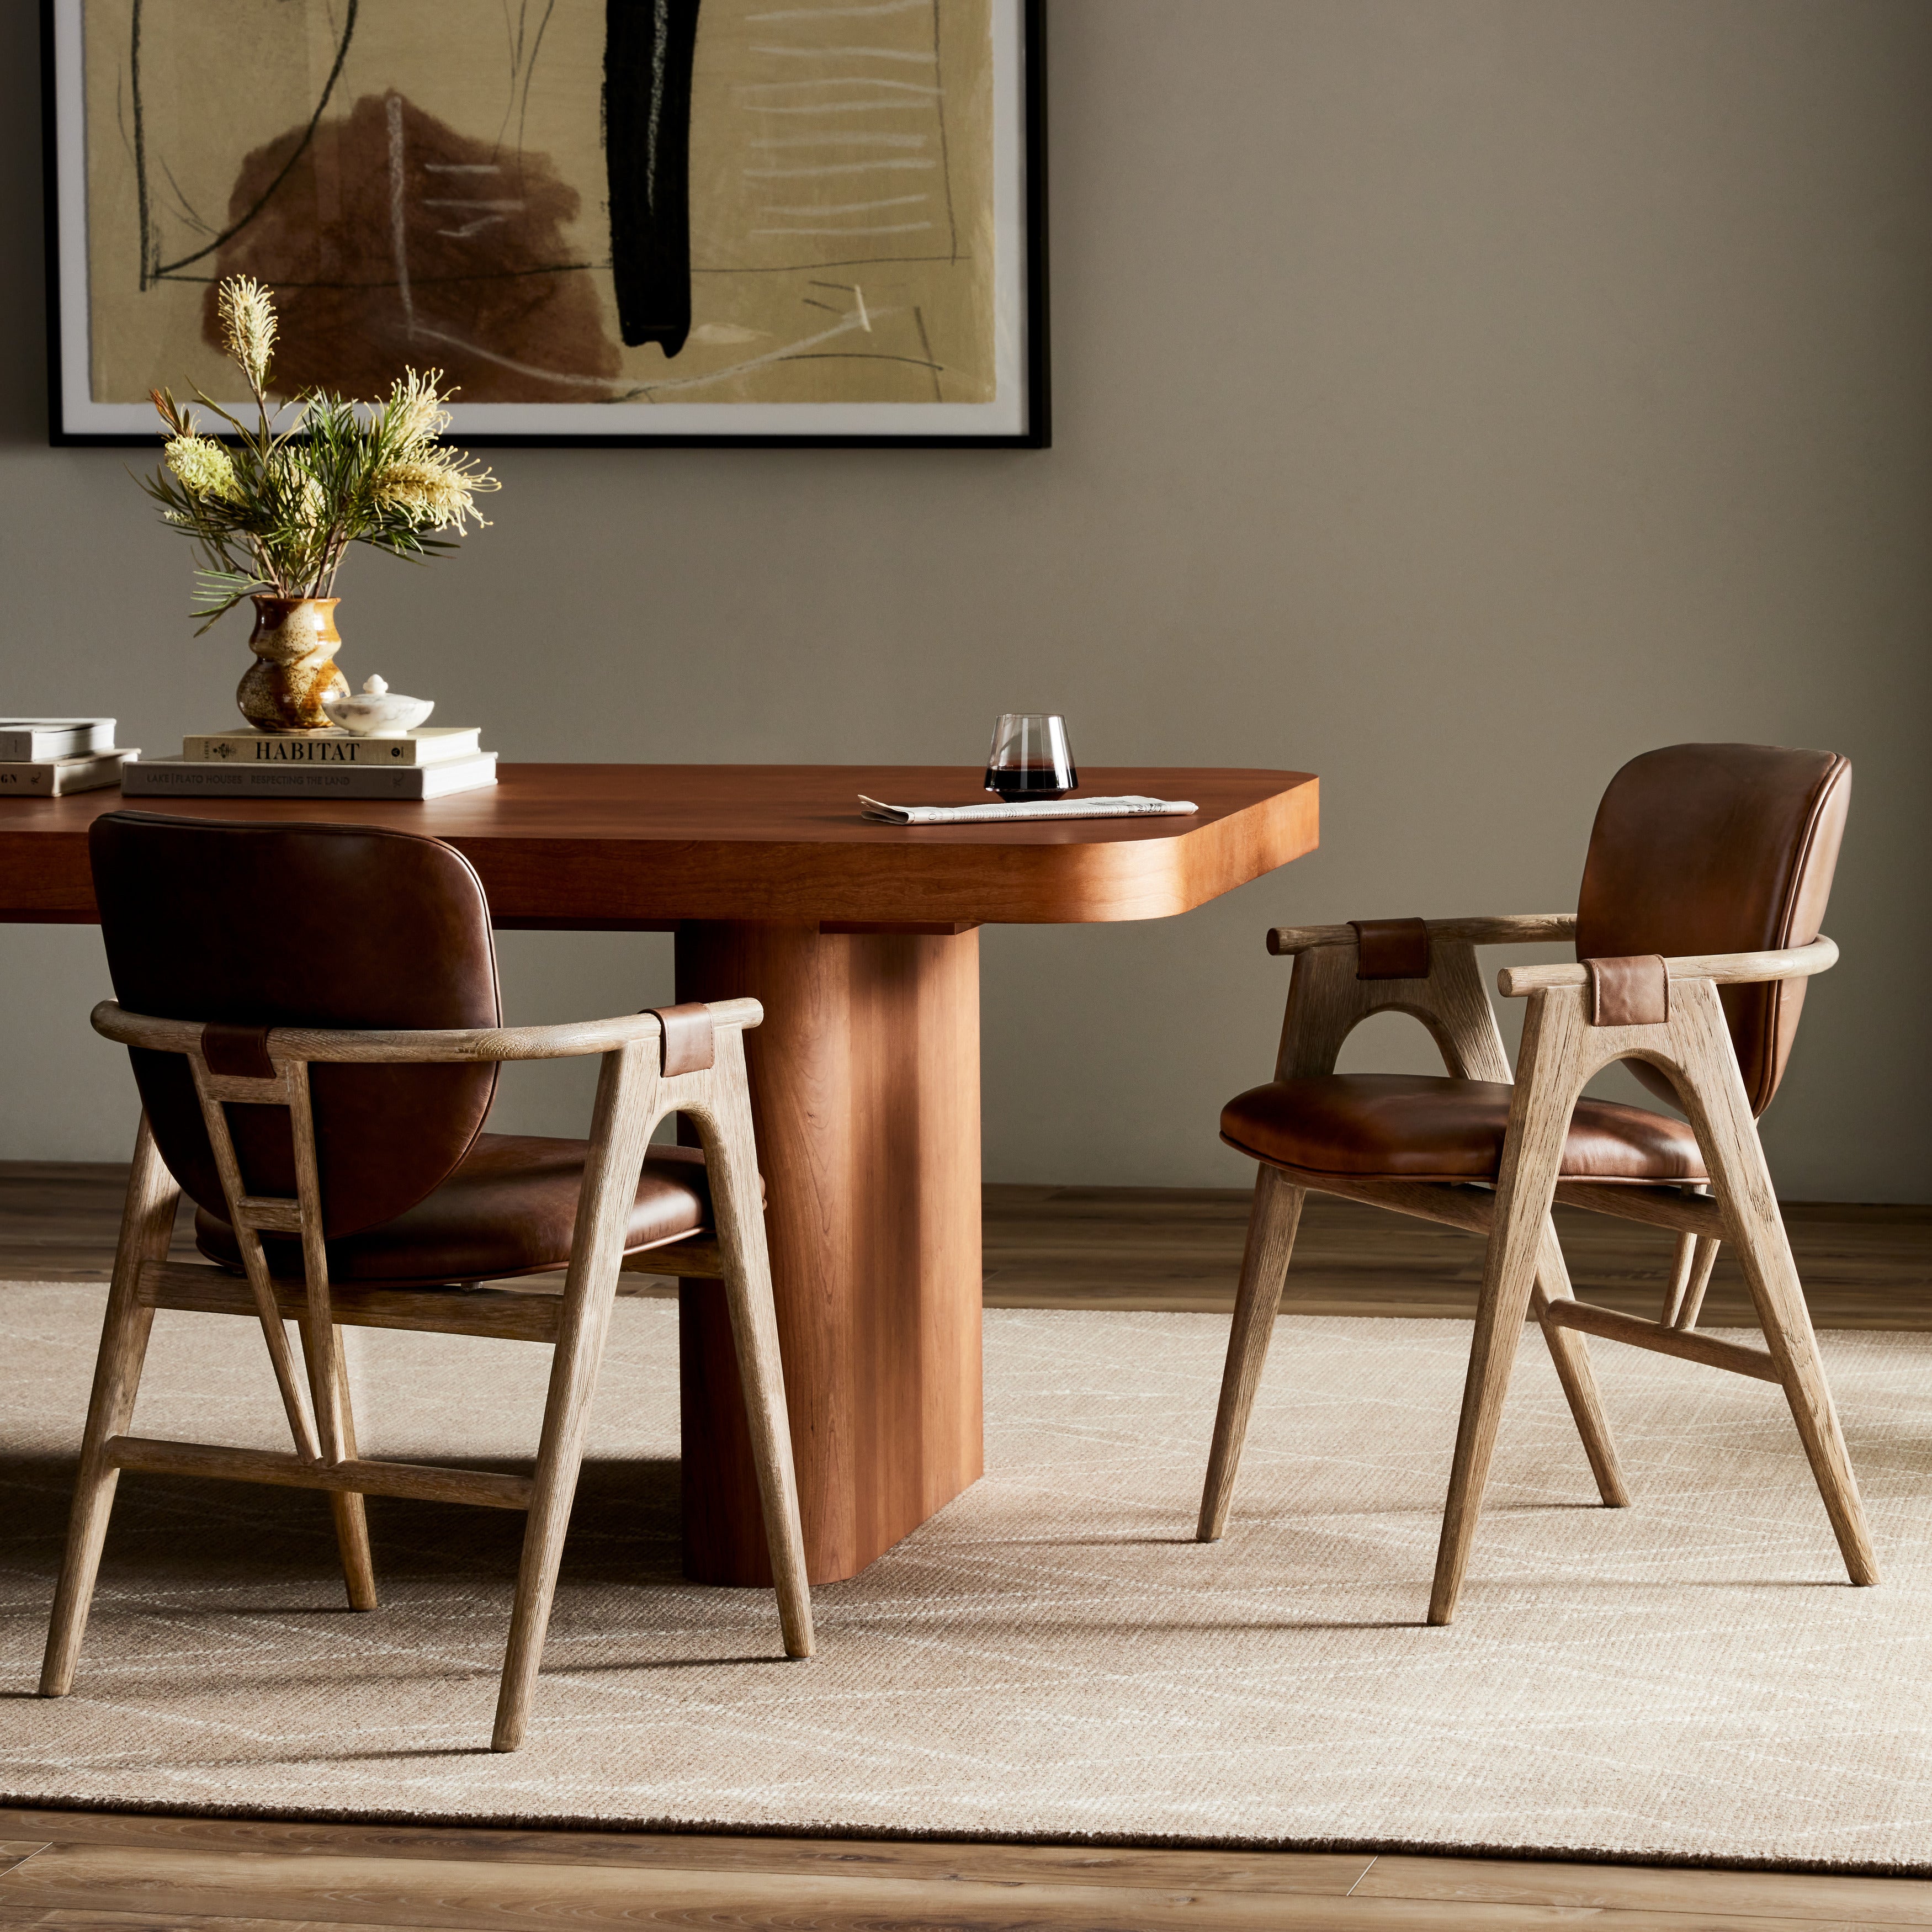 Inspired by Danish midcentury styles, this dining armchair pairs angular framework with soft, rounded seat panels. Seating and arm straps finished in top-grain leather exclusive to Four Hands. Amethyst Home provides interior design, new construction, custom furniture, and area rugs in the Newport Beach metro area.